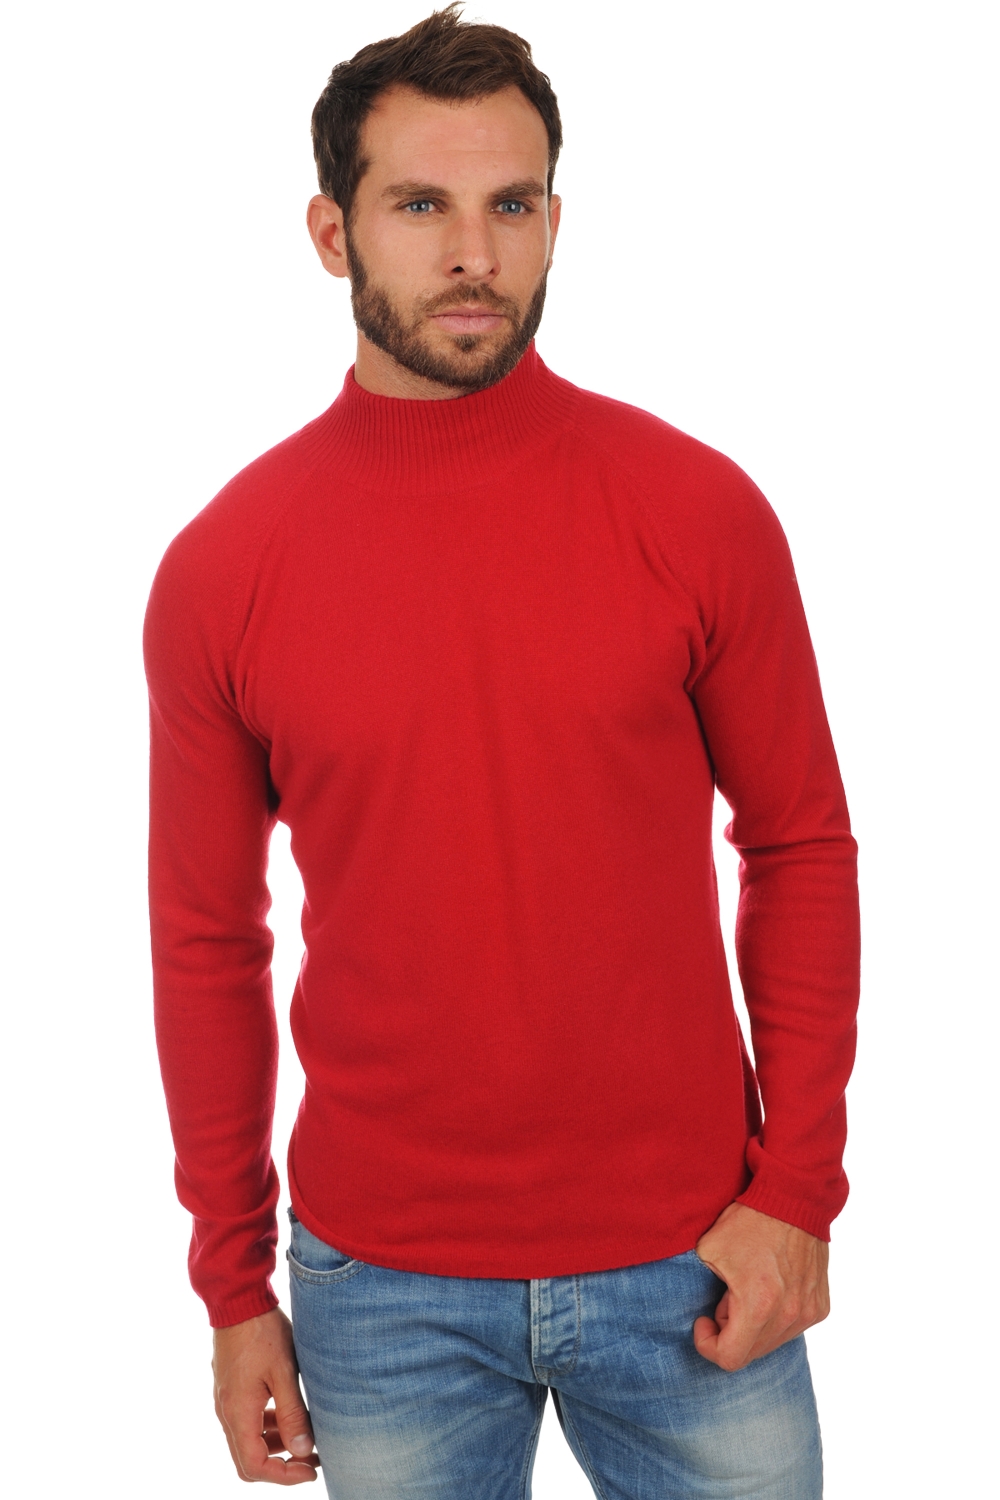 Cashmere men roll neck frederic blood red 4xl